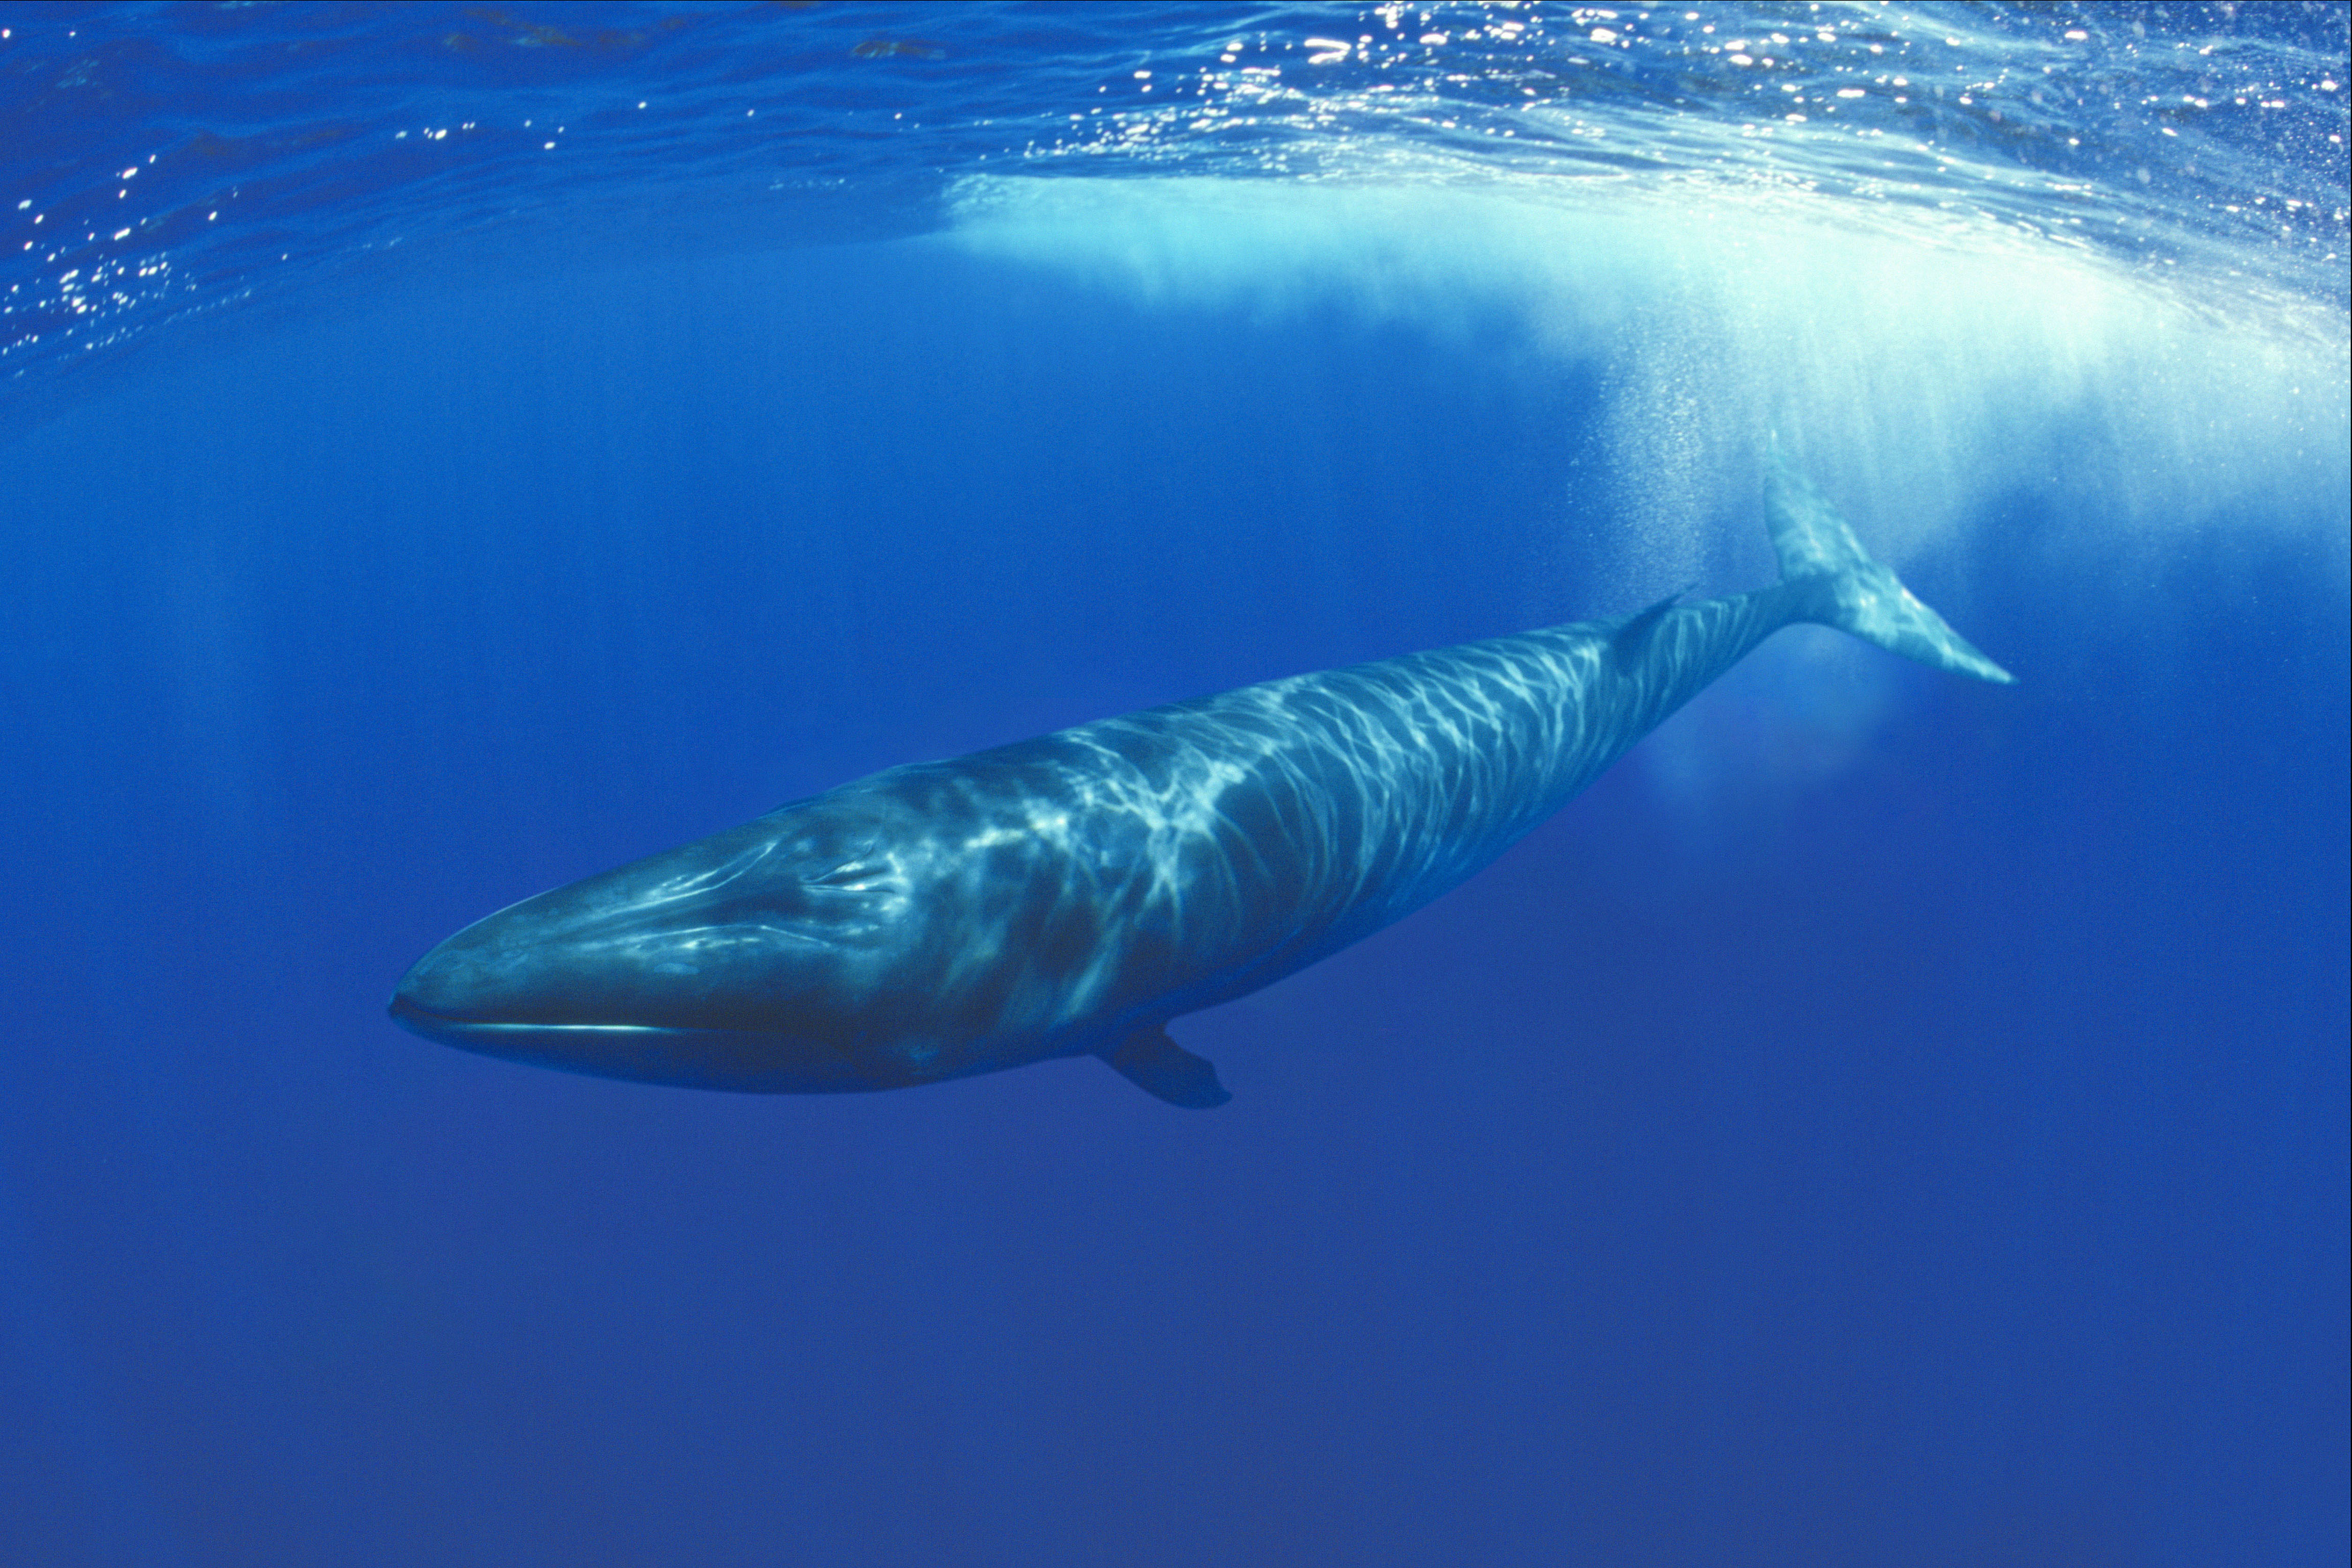 Scientists study whale that lives 200 years for clues